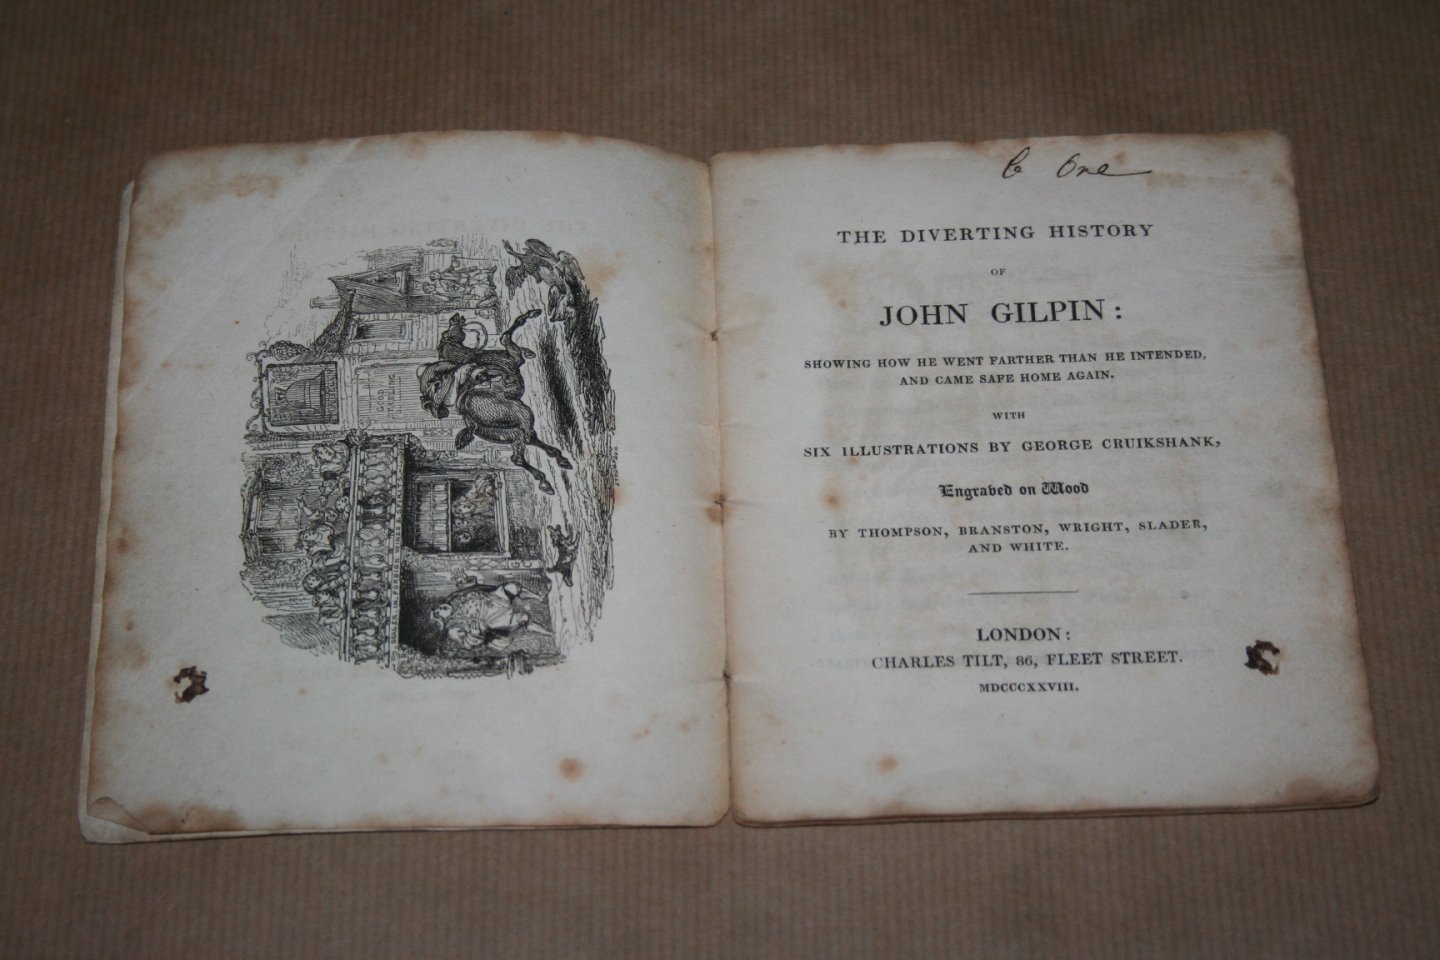 Illustrations by George Cruikshank - The diverting history of John Gilpin